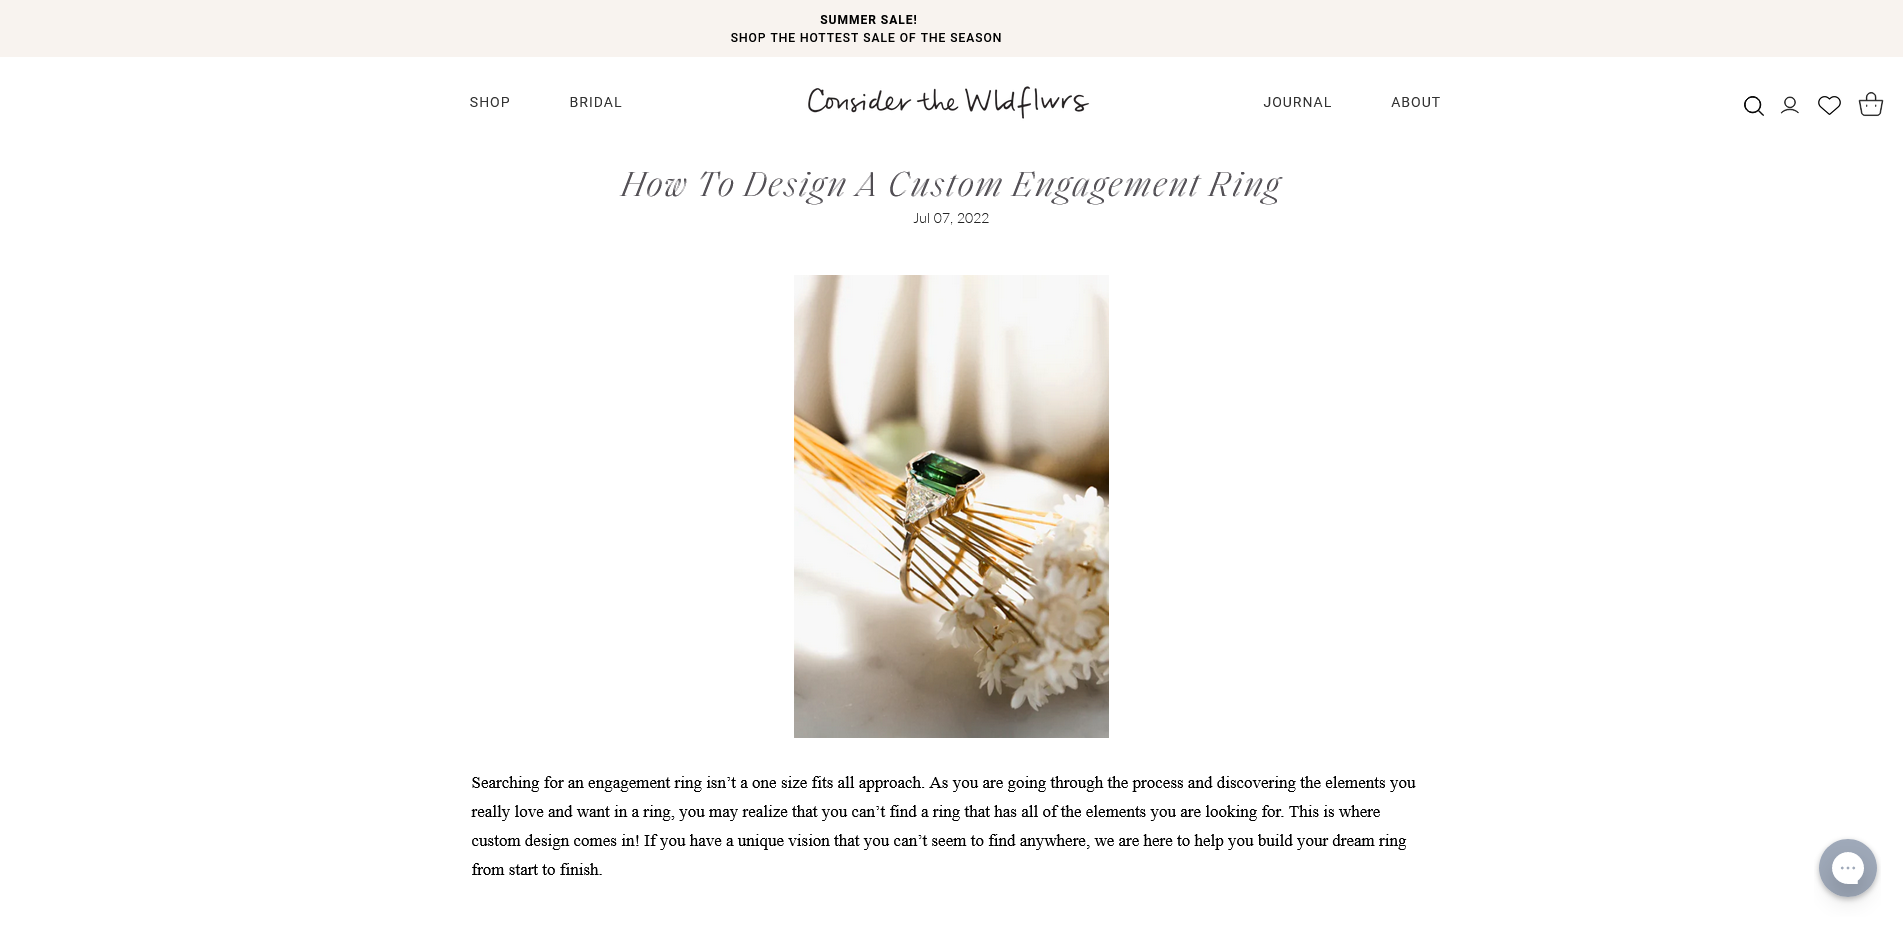 Shopify Store Blog Consider the Wldflwrs